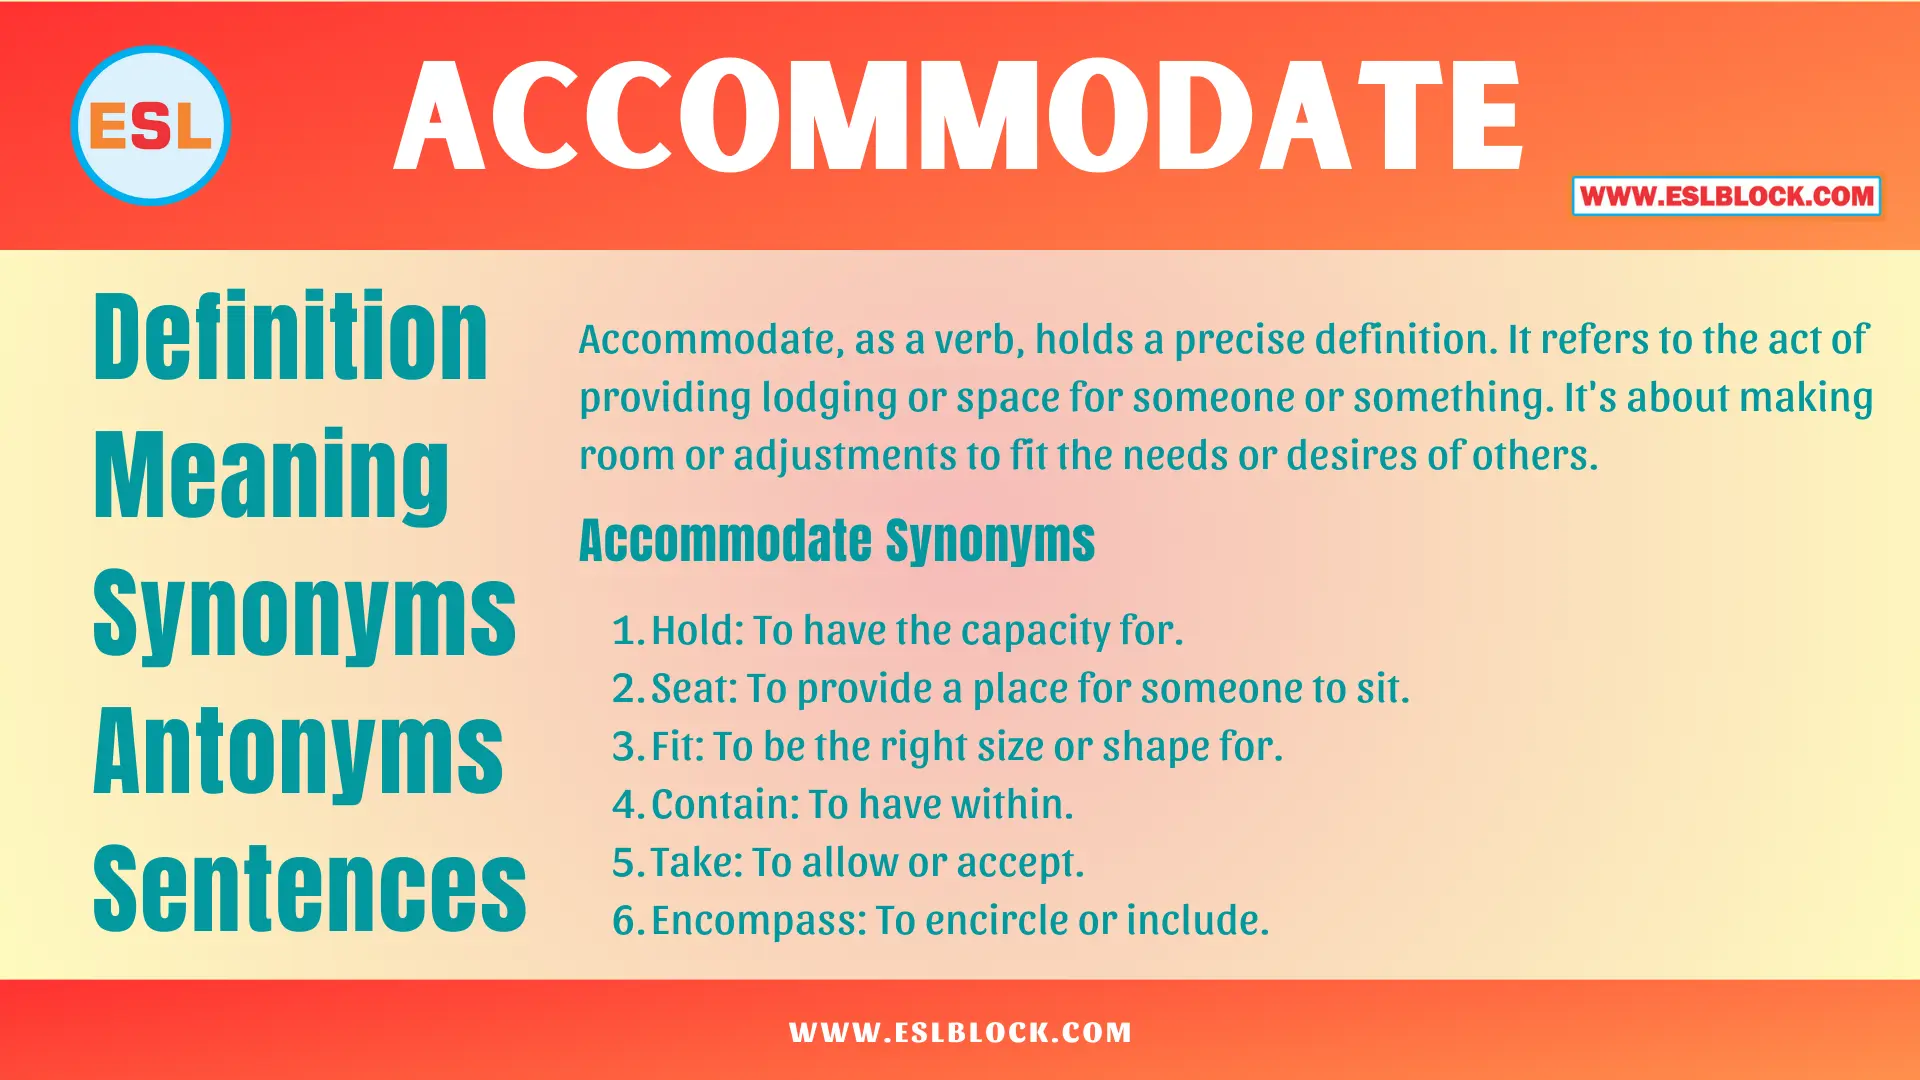 Accommodate Definition5